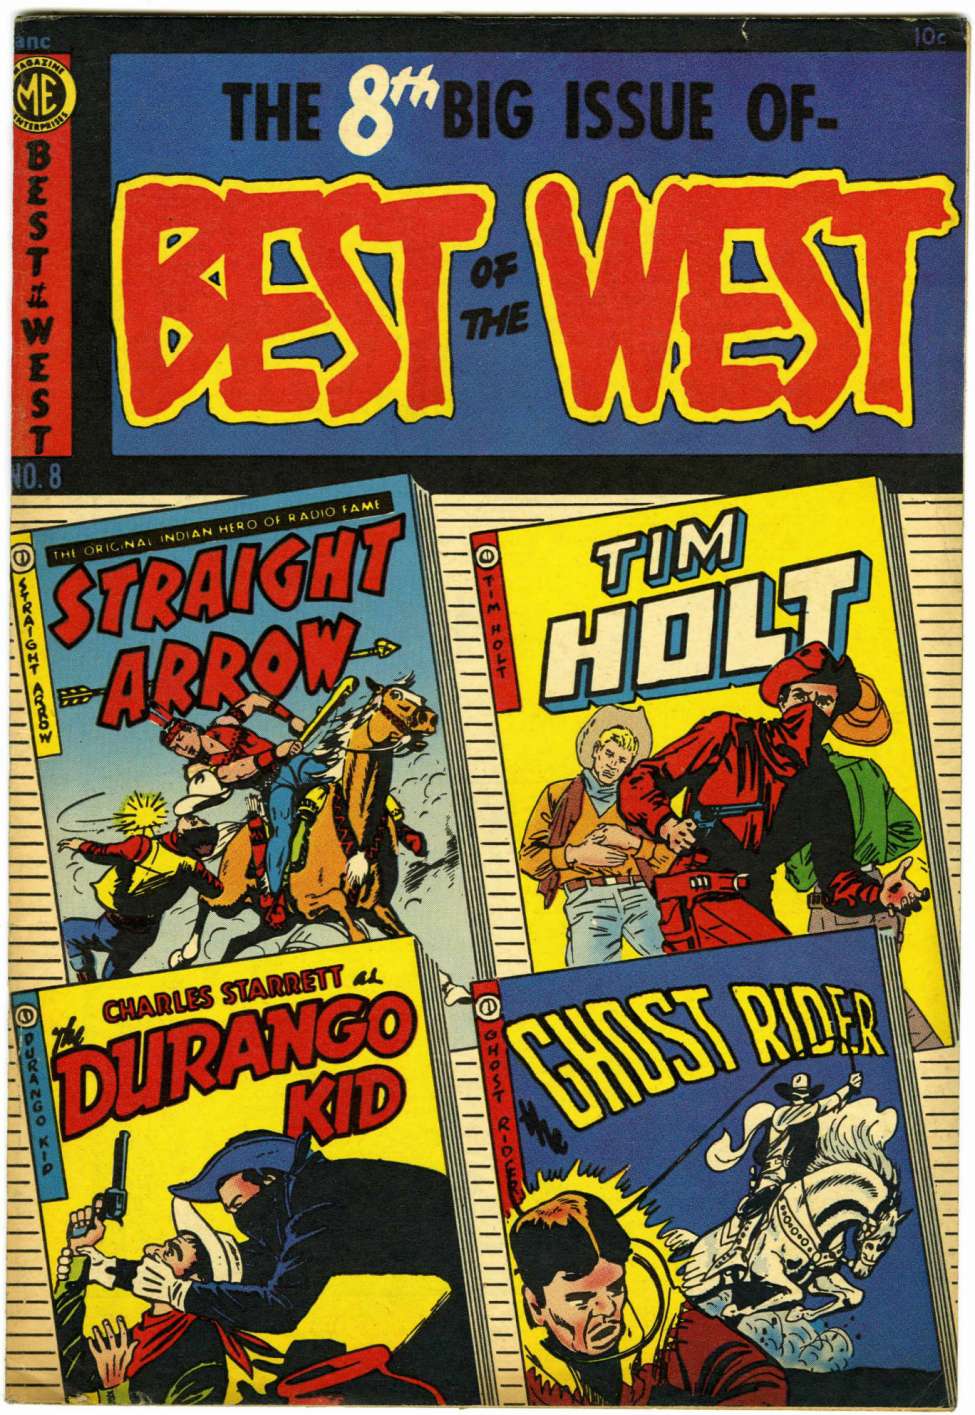 Book Cover For Best of the West 8